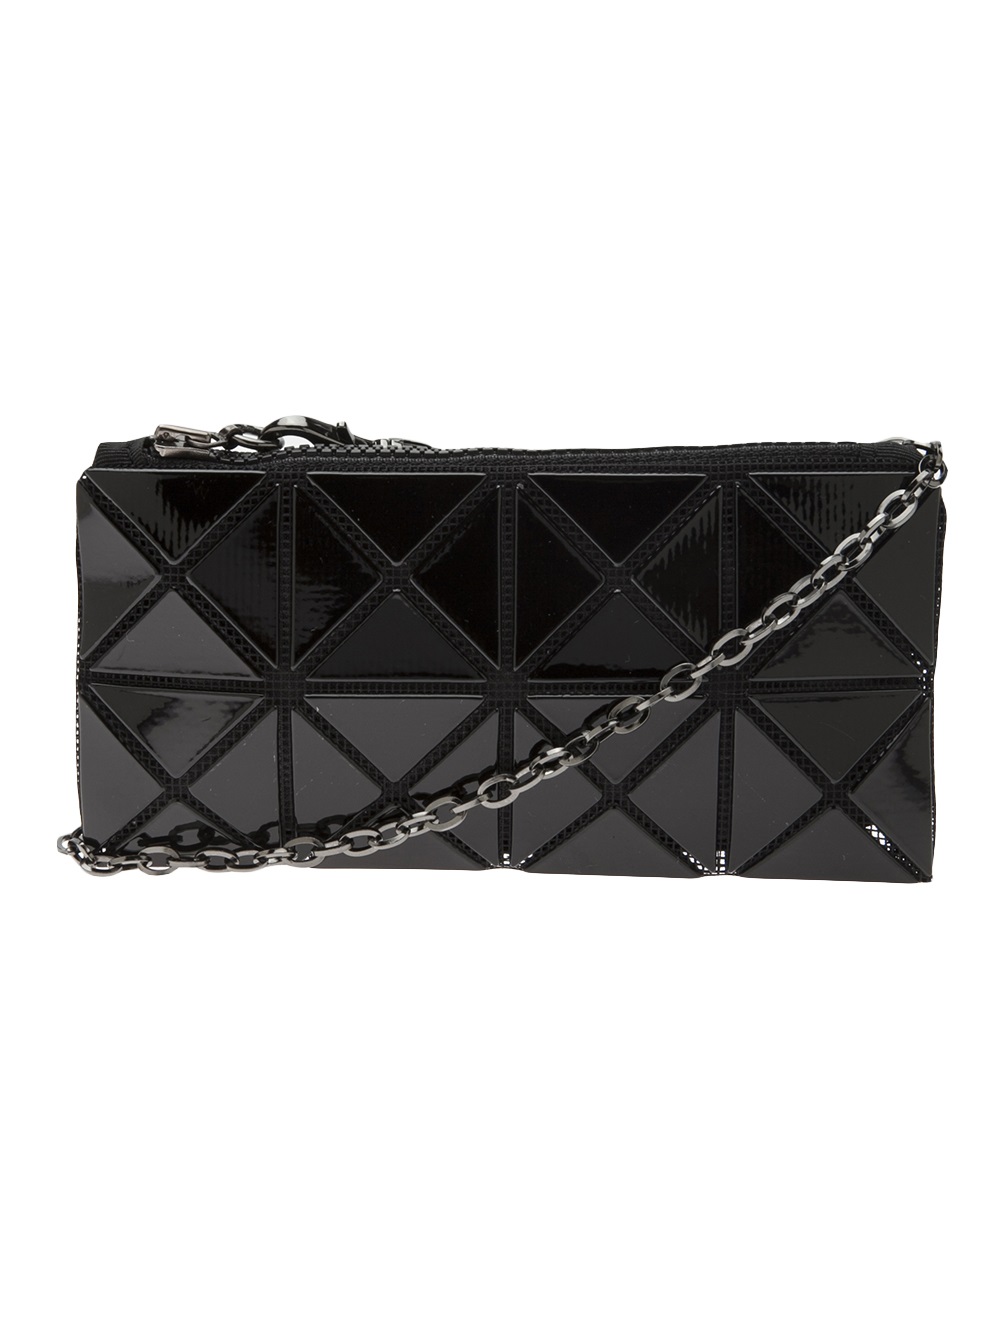 Bao Bao Issey Miyake Pyramid Square Pouch in Black - Lyst